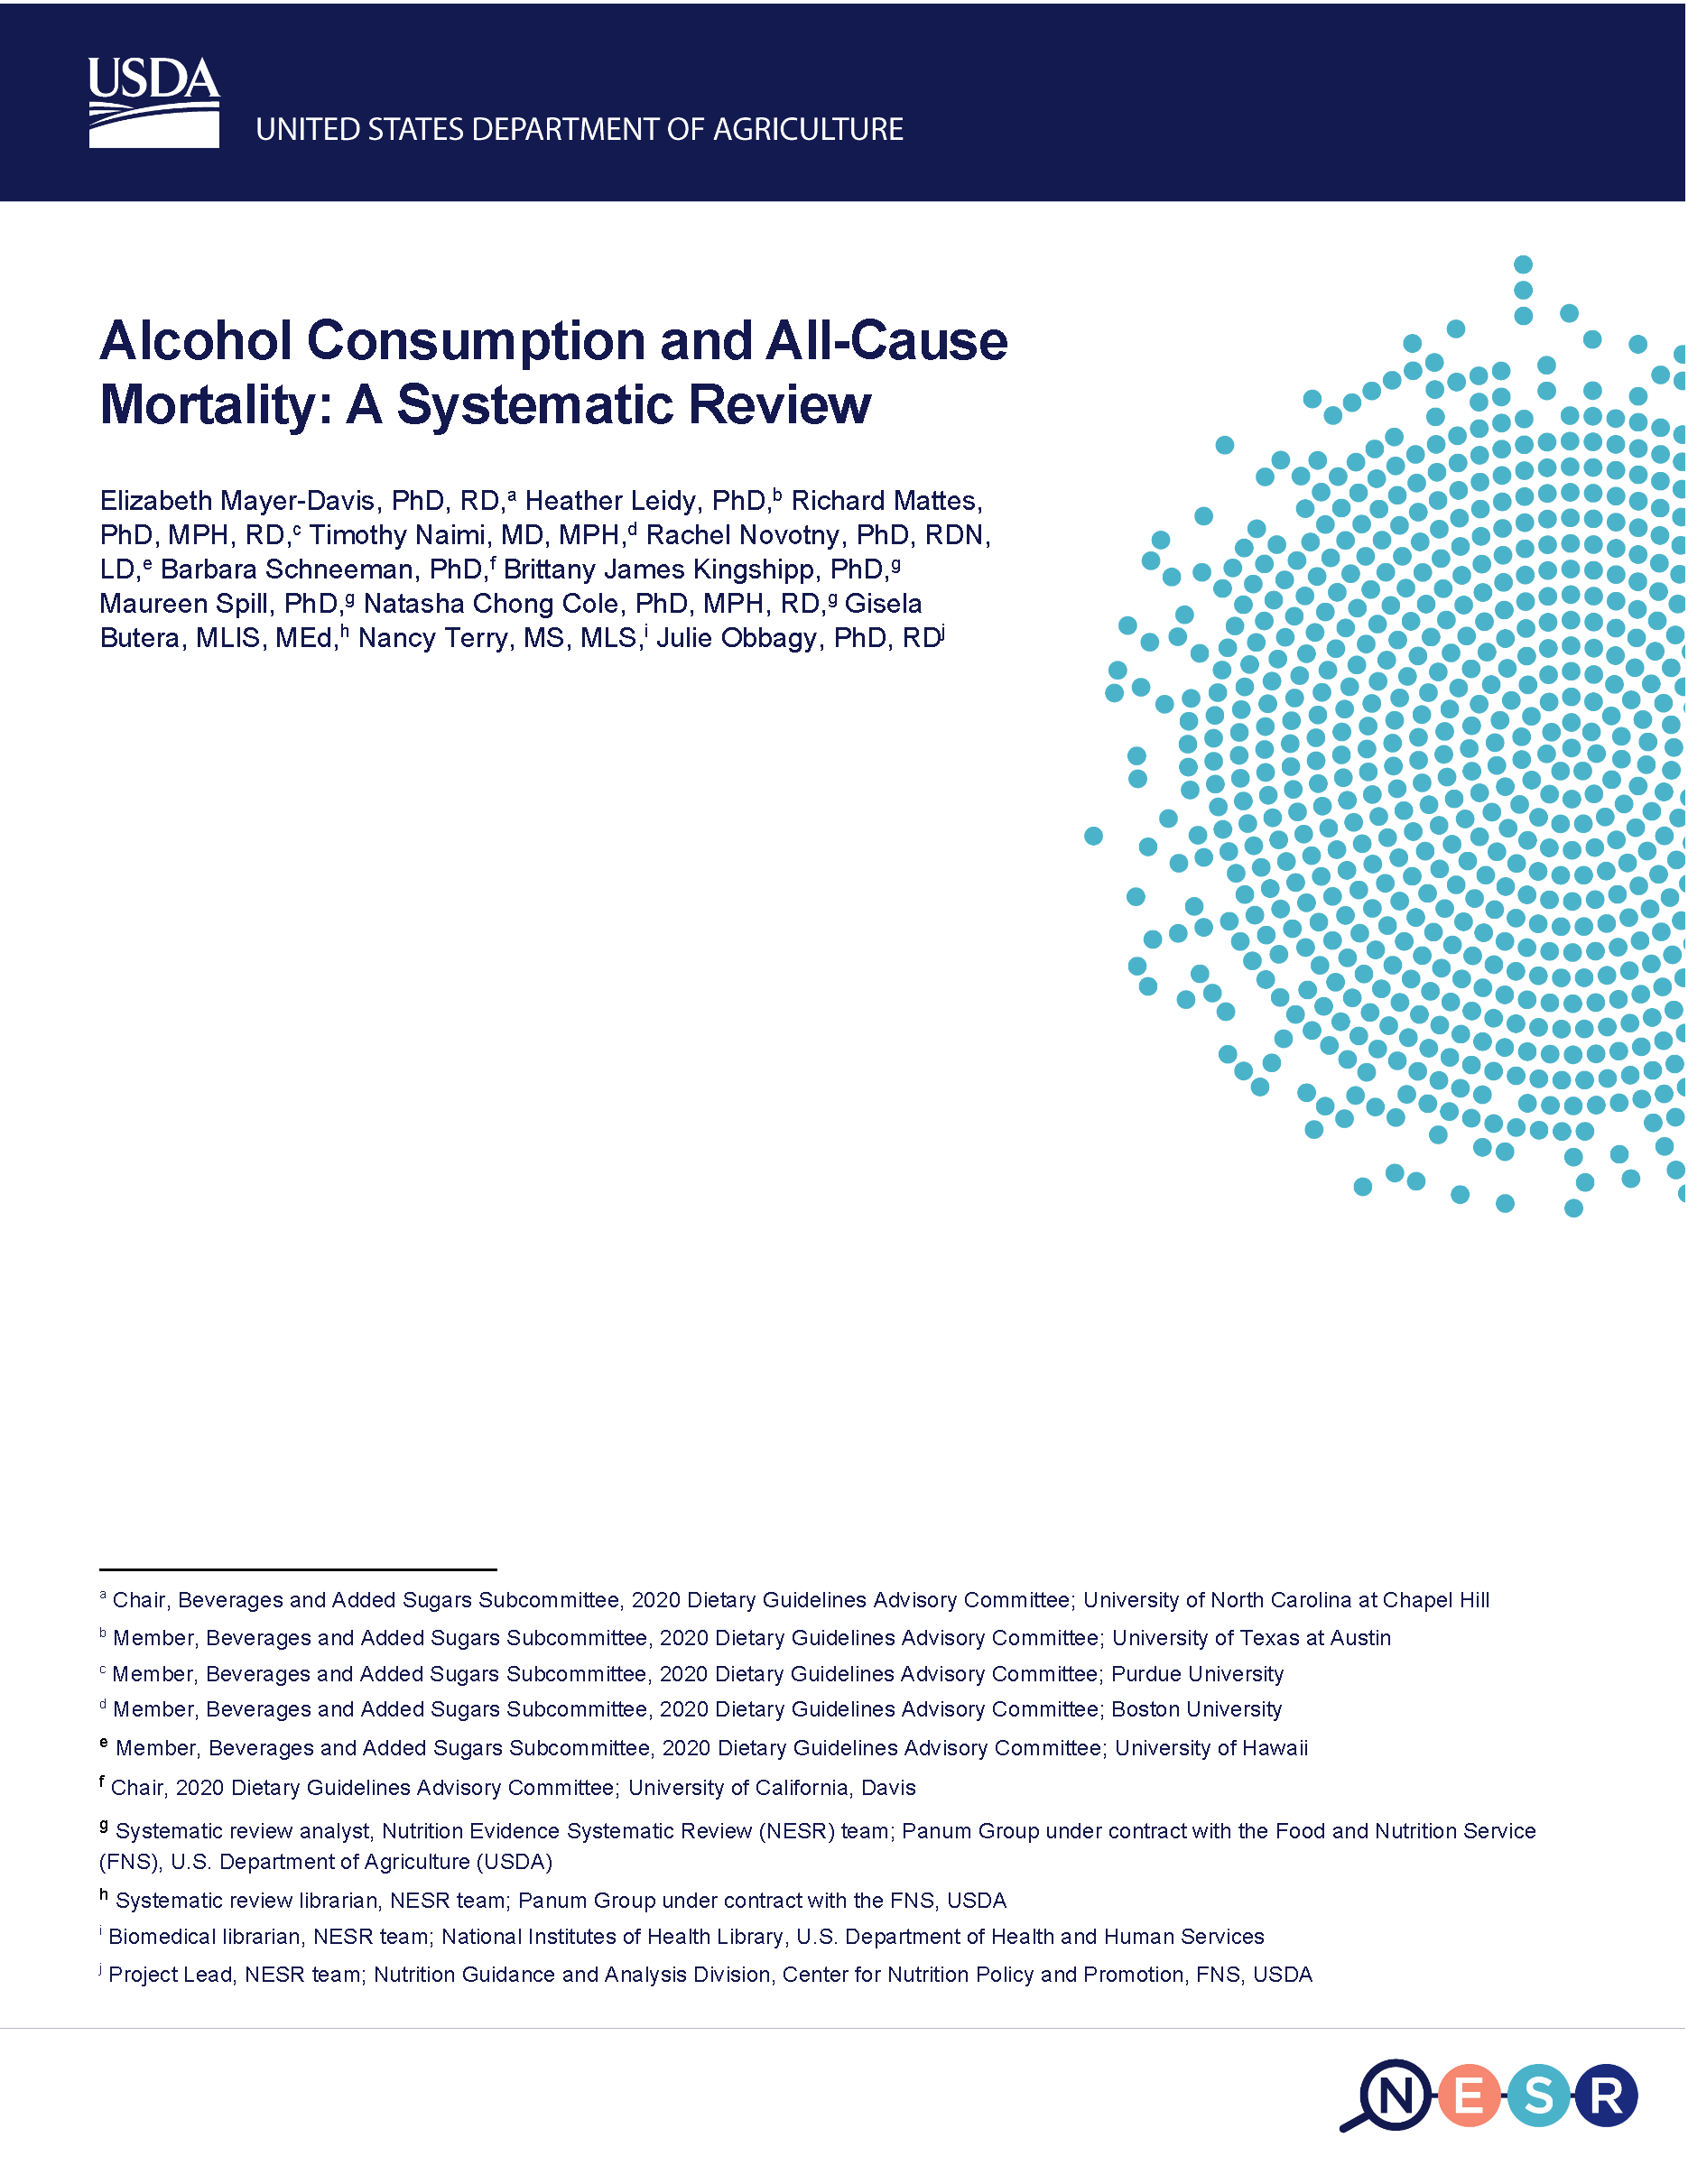 Cover of alcohol consumption and all cause mortality report